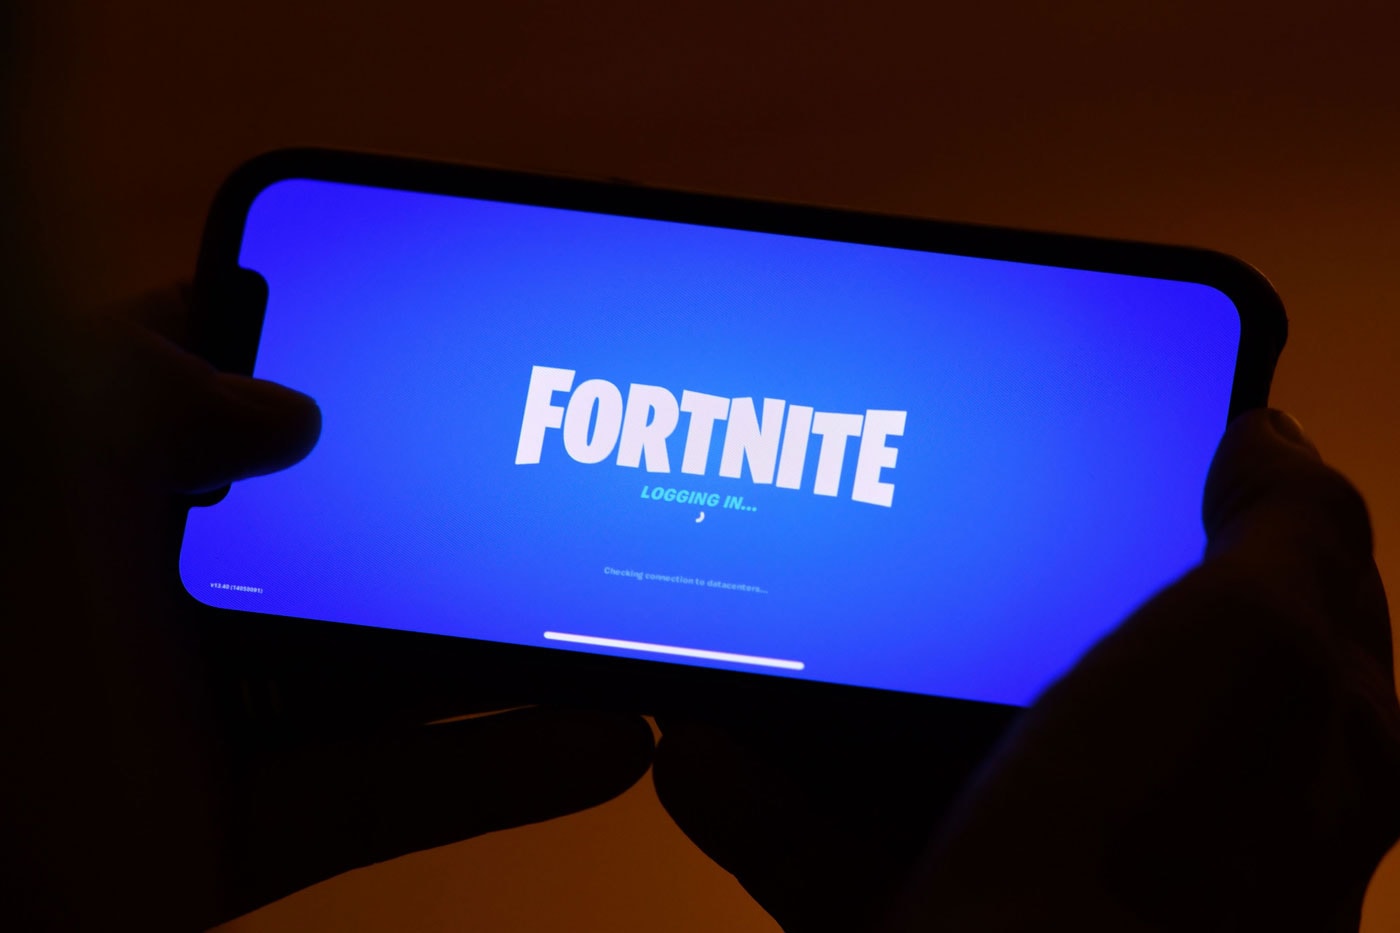 'Fortnite' Has Accidentally Given Away Its Rarest Item, the Axe of Champions epic games grand royale fncs video games gamers